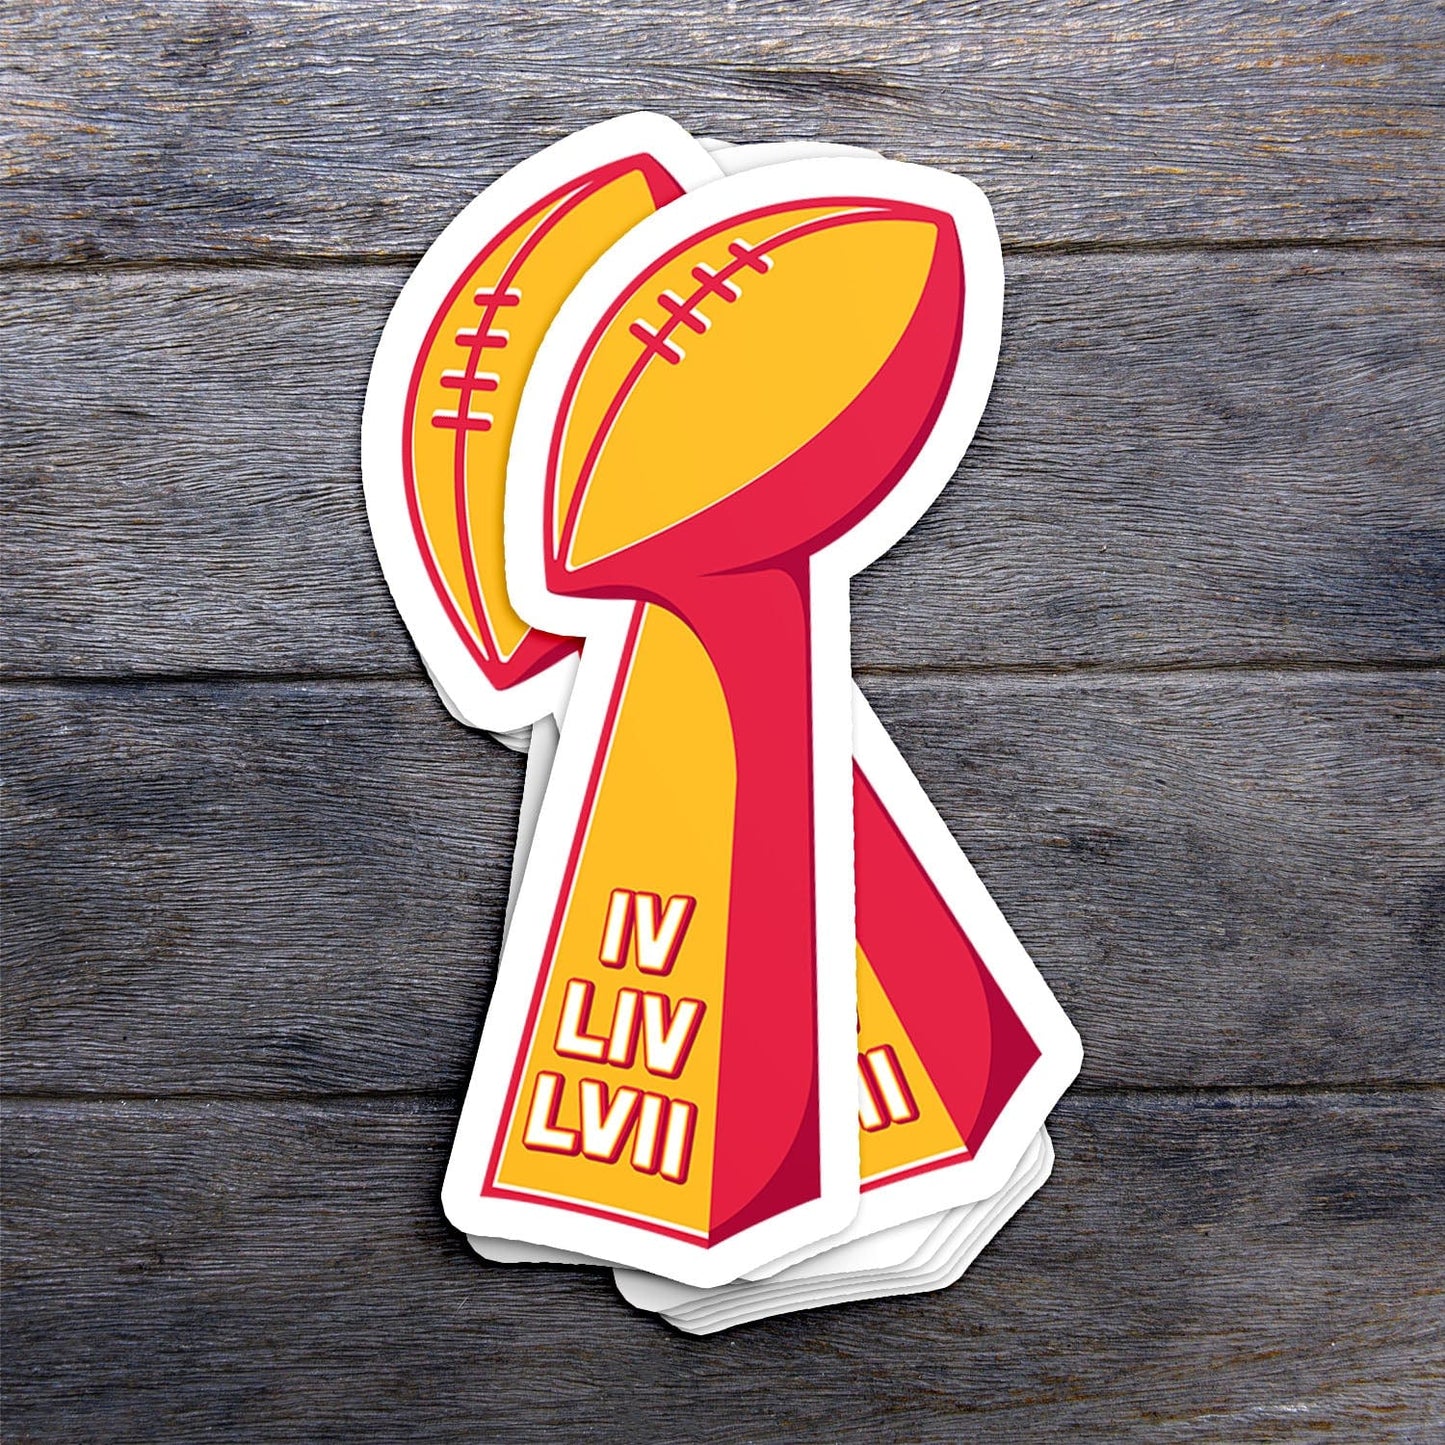 KC Swag Kansas City Chiefs red, yellow LOMBARDI SBx3 vinyl die cut decal sticker stack on dark wood table